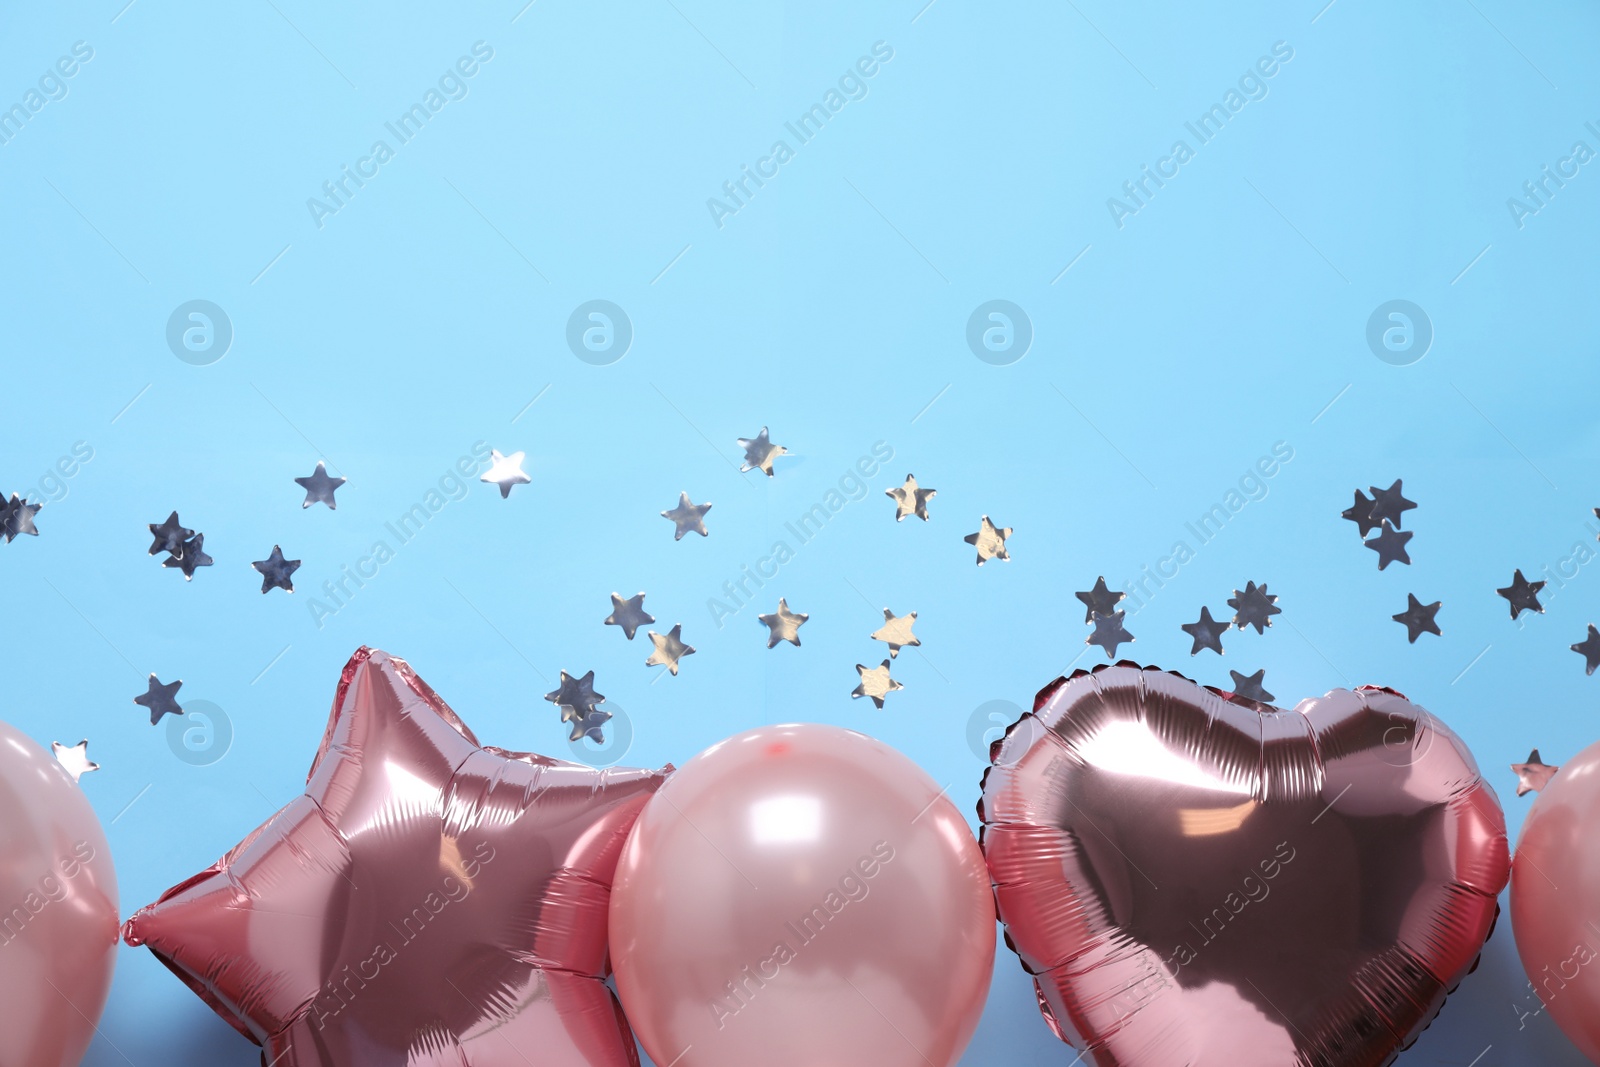 Photo of Colorful balloons and confetti on light blue background, flat lay. Space for text